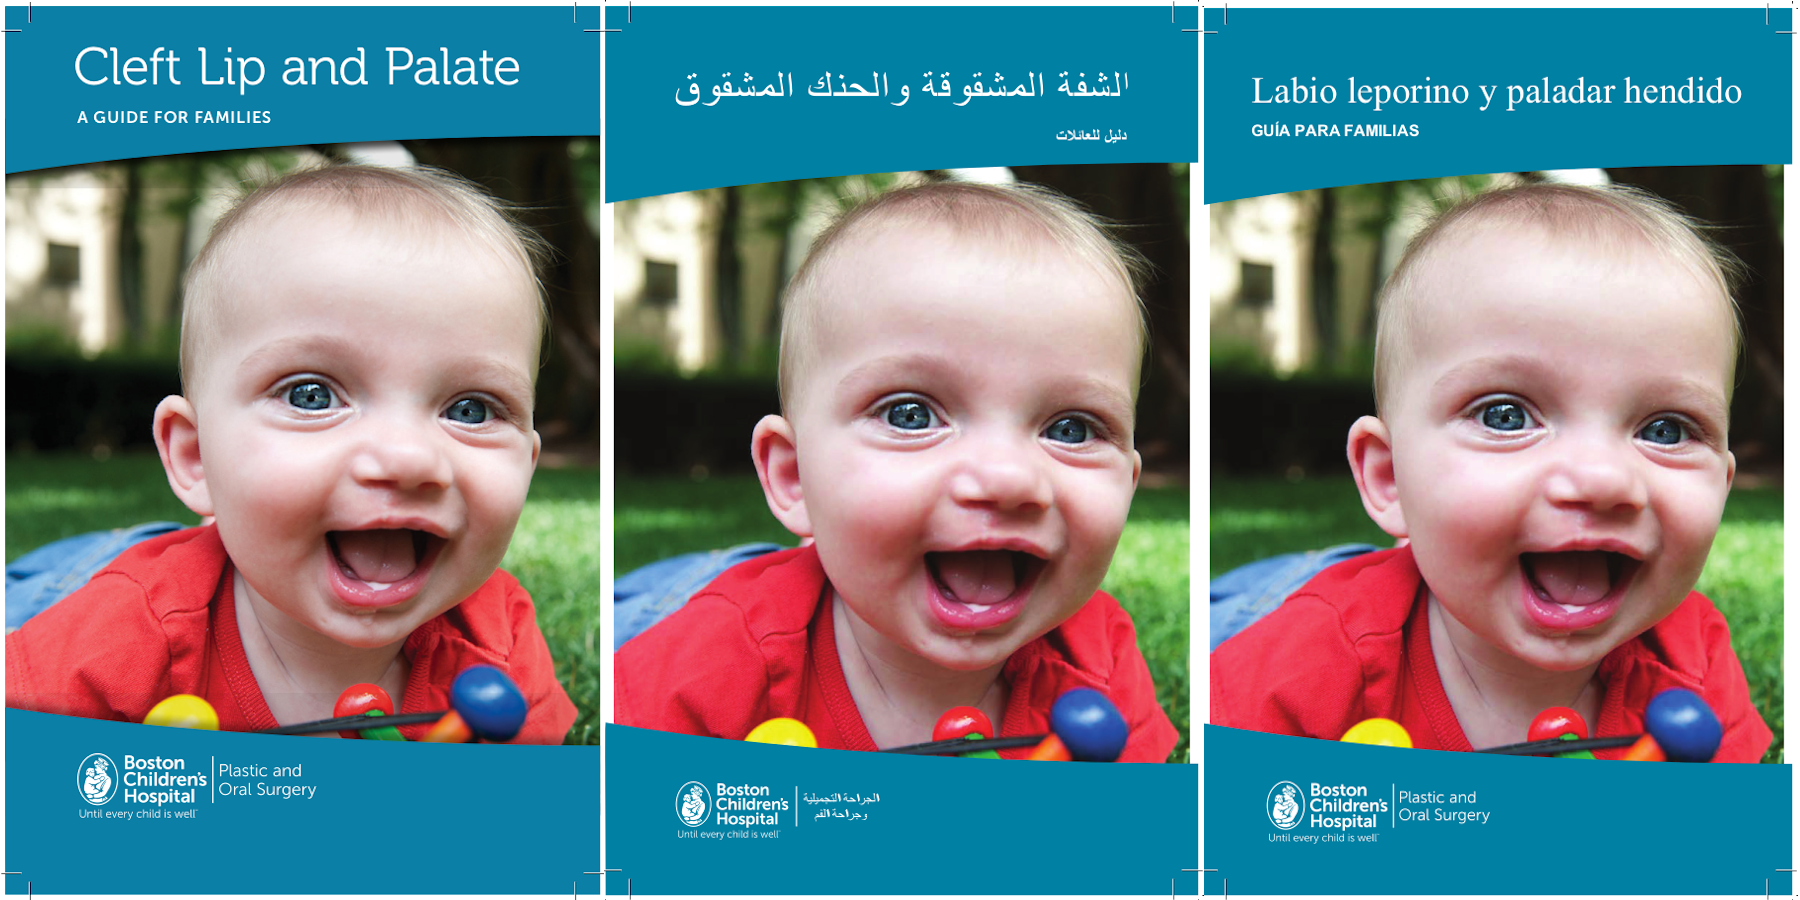 Cover of cleft lip and cleft palate brochures